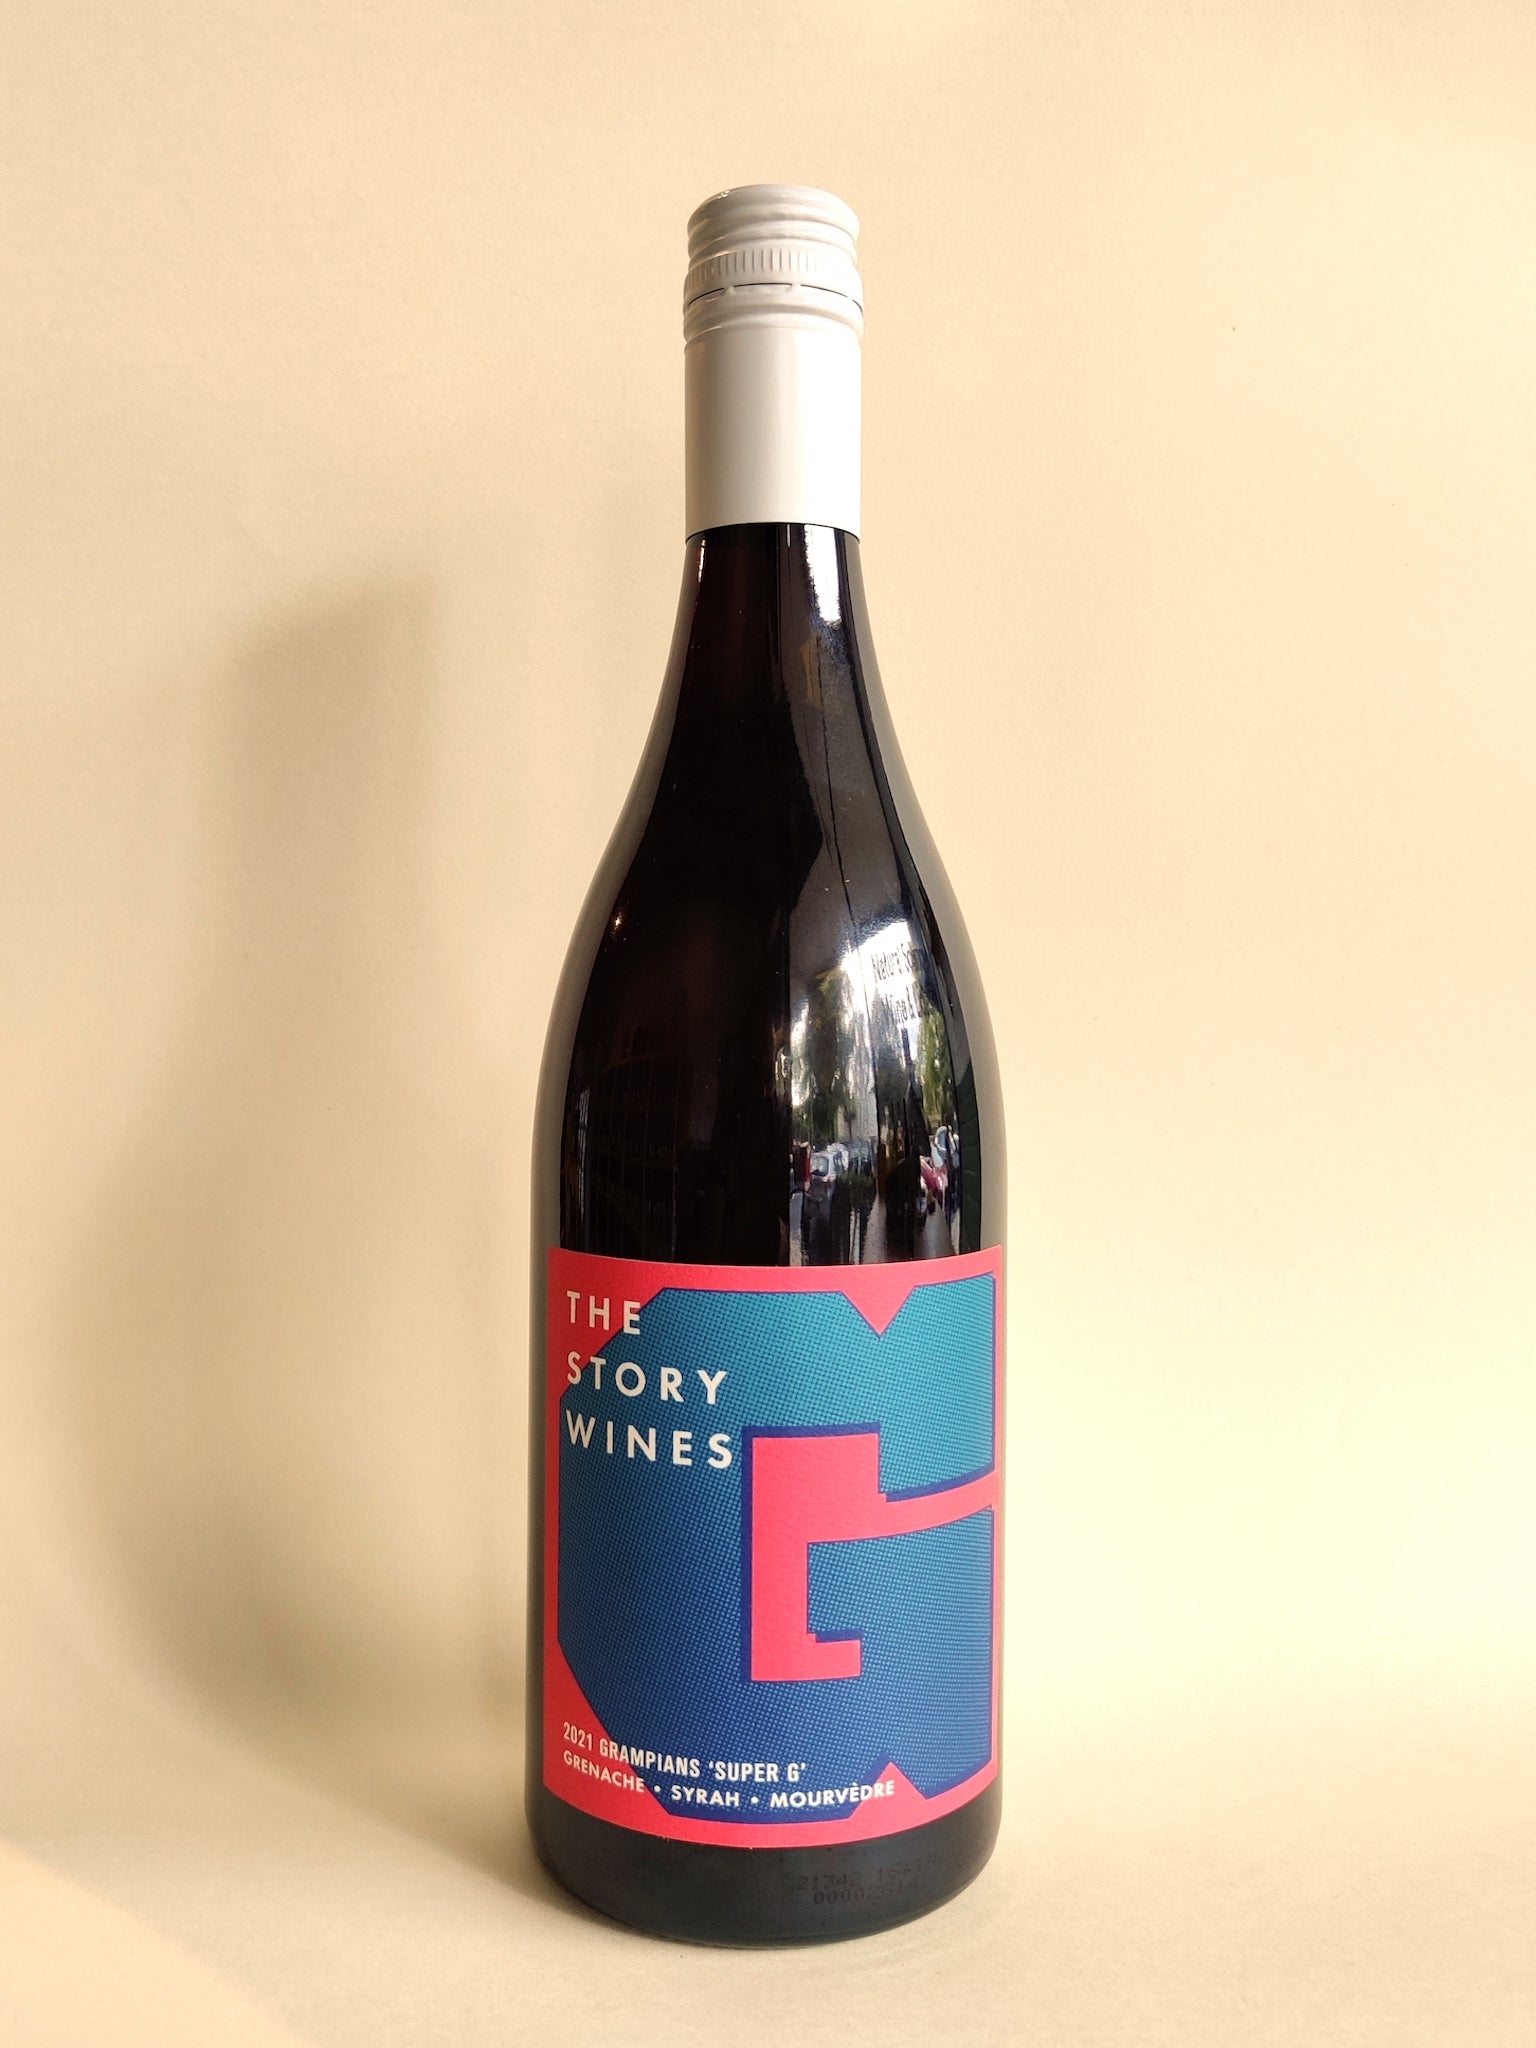 The Story Super G Grenache/Syrah/Mourvedre from the Grampians, Victoria. 